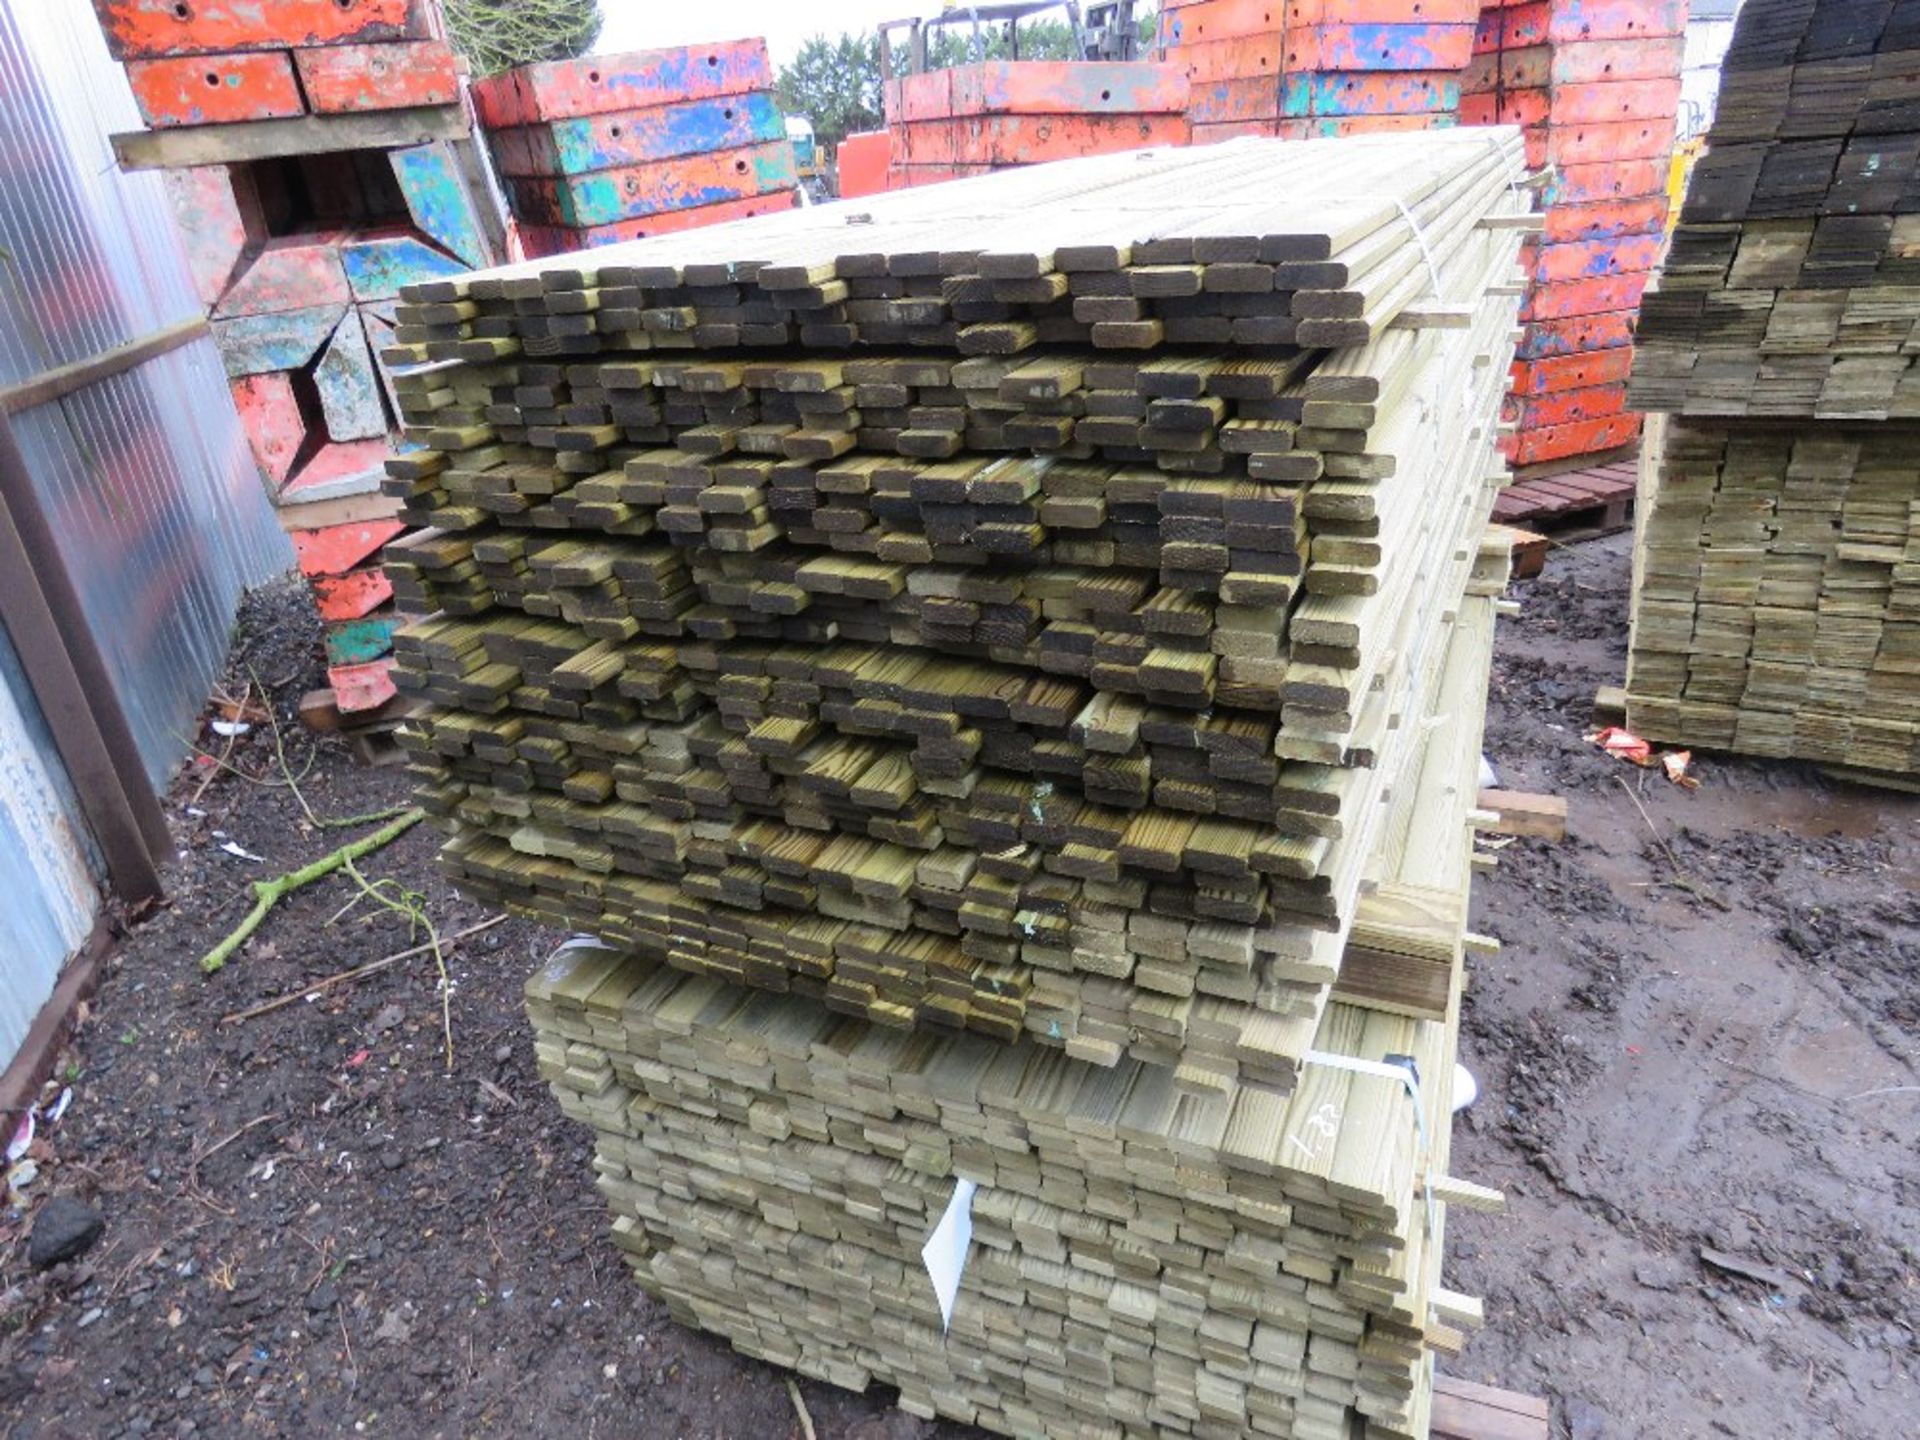 2 LARGE PACKS OF FENCING TIMBER/TRELLIS SLATS 1.83MX5CM APPROX. - Image 2 of 3